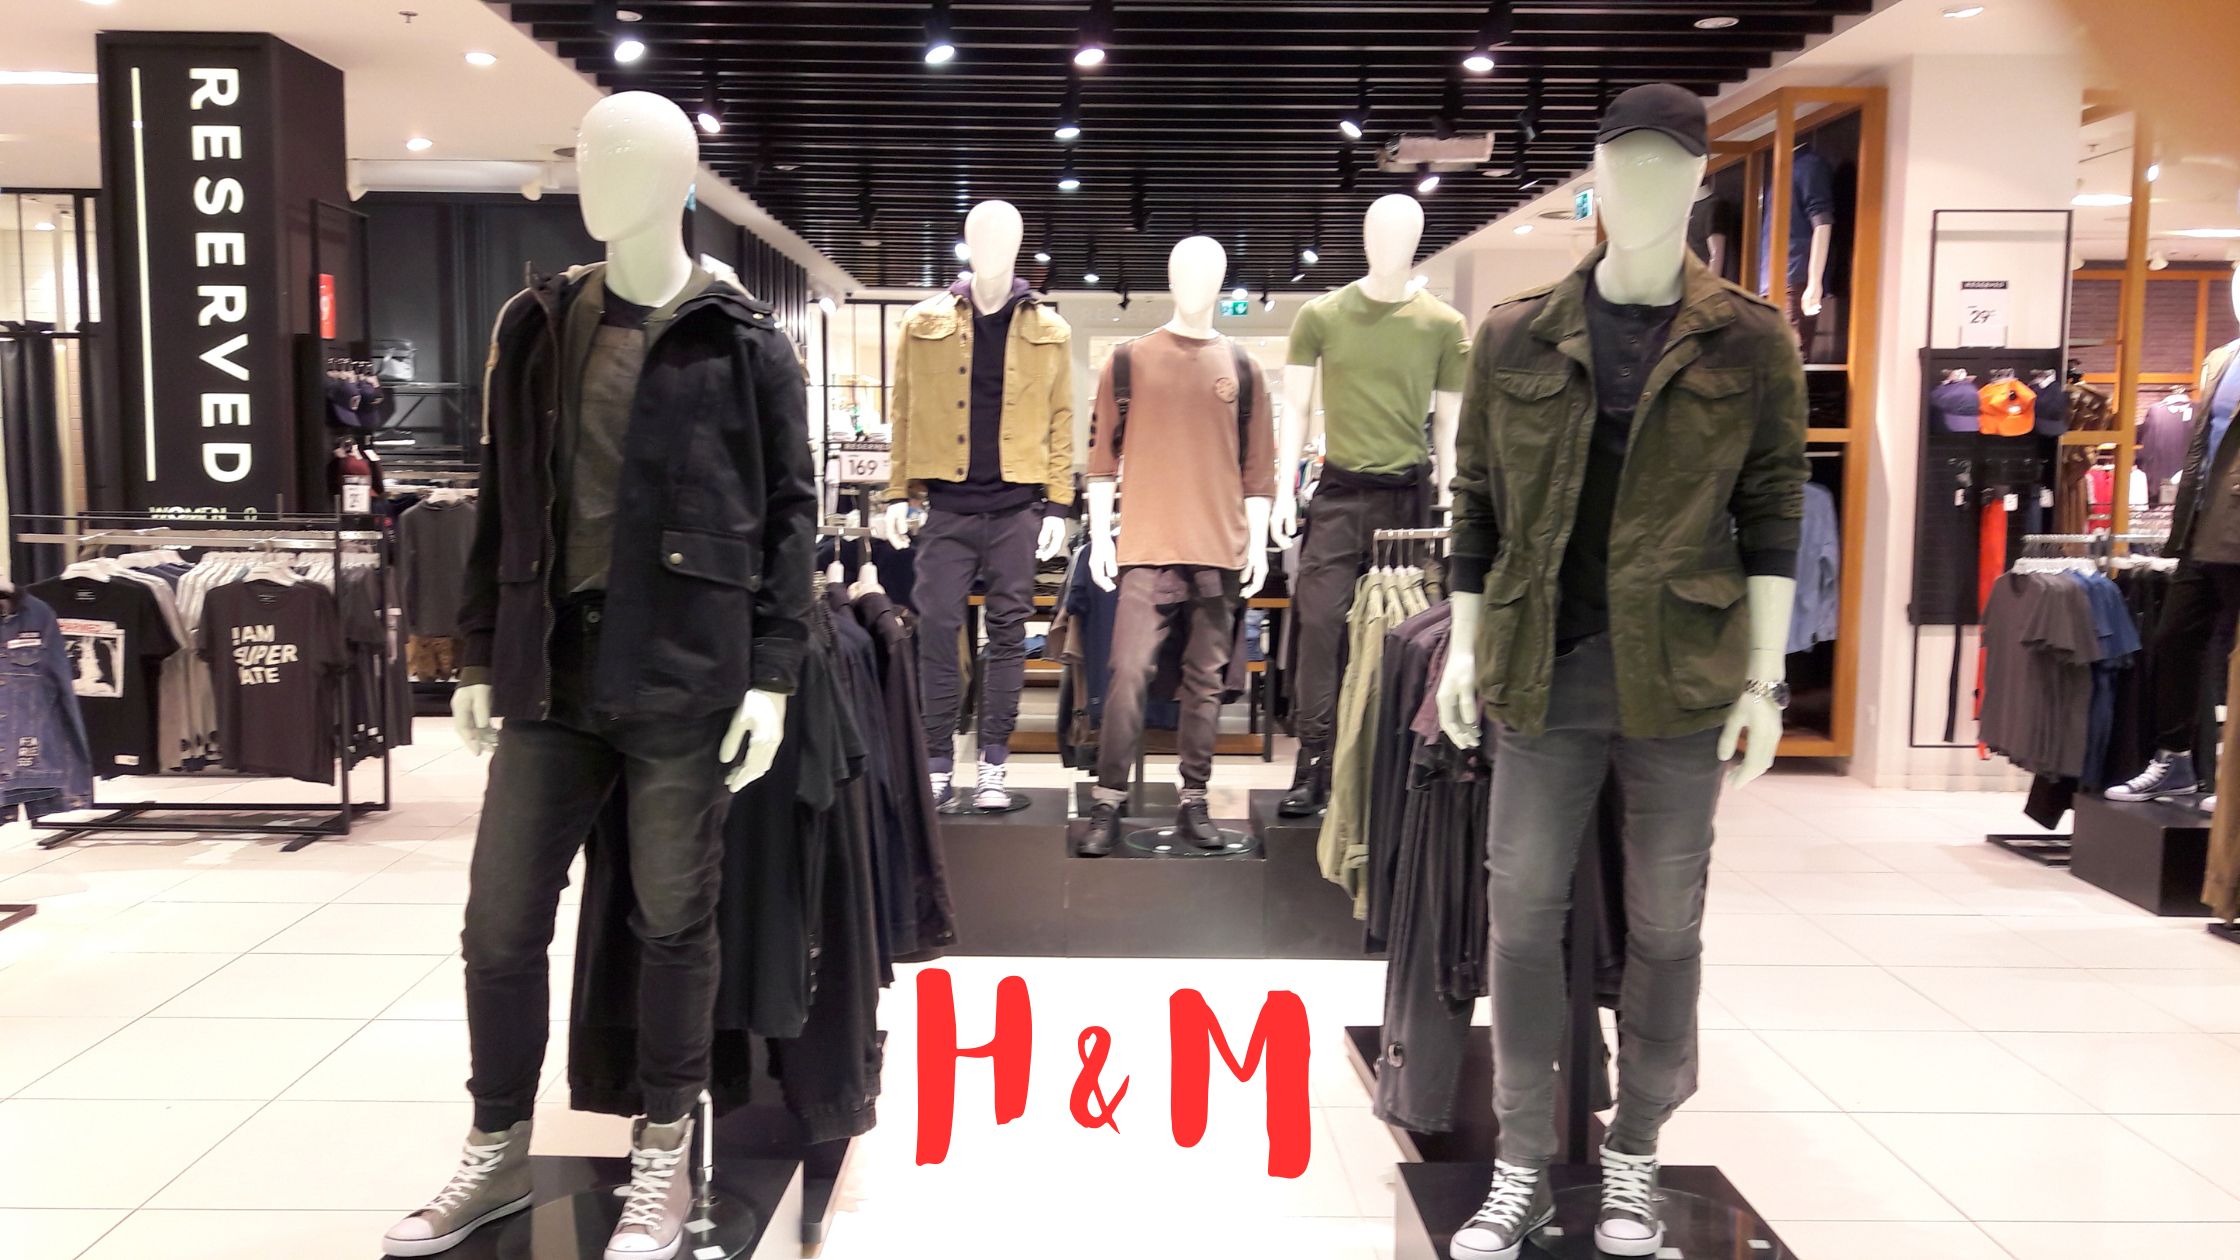 An inside view of H&M fashion store.